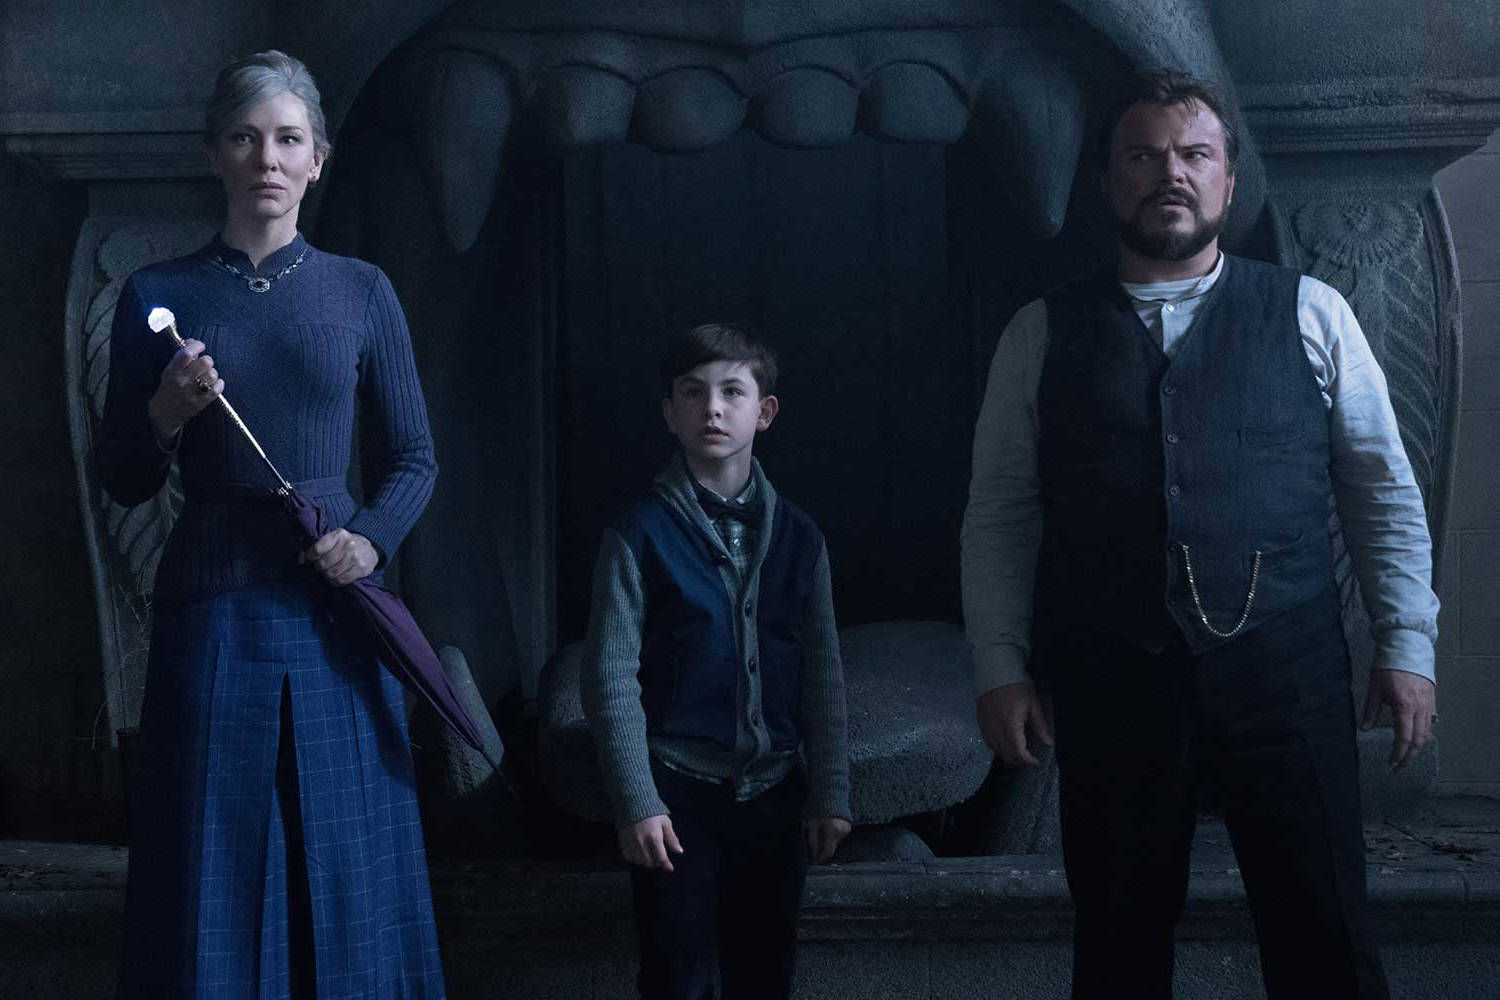 Jack Black and Cate Blanchett star in ‘The House with a Clock in Its Walls.’ (Universal Pictures)